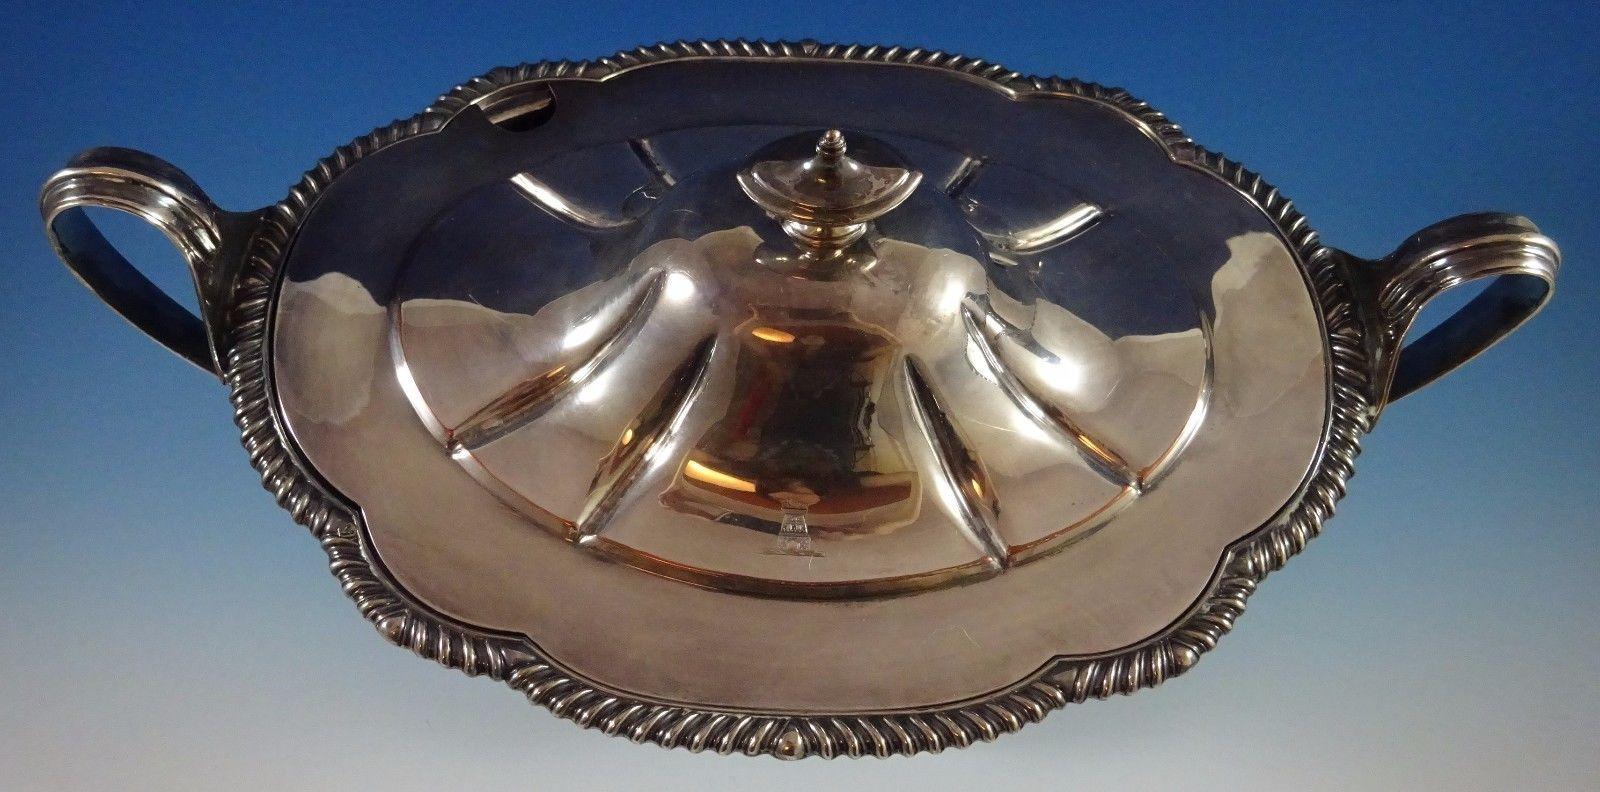 American English Silverplate by N B & S Soup Tureen with Silverplate on Copper